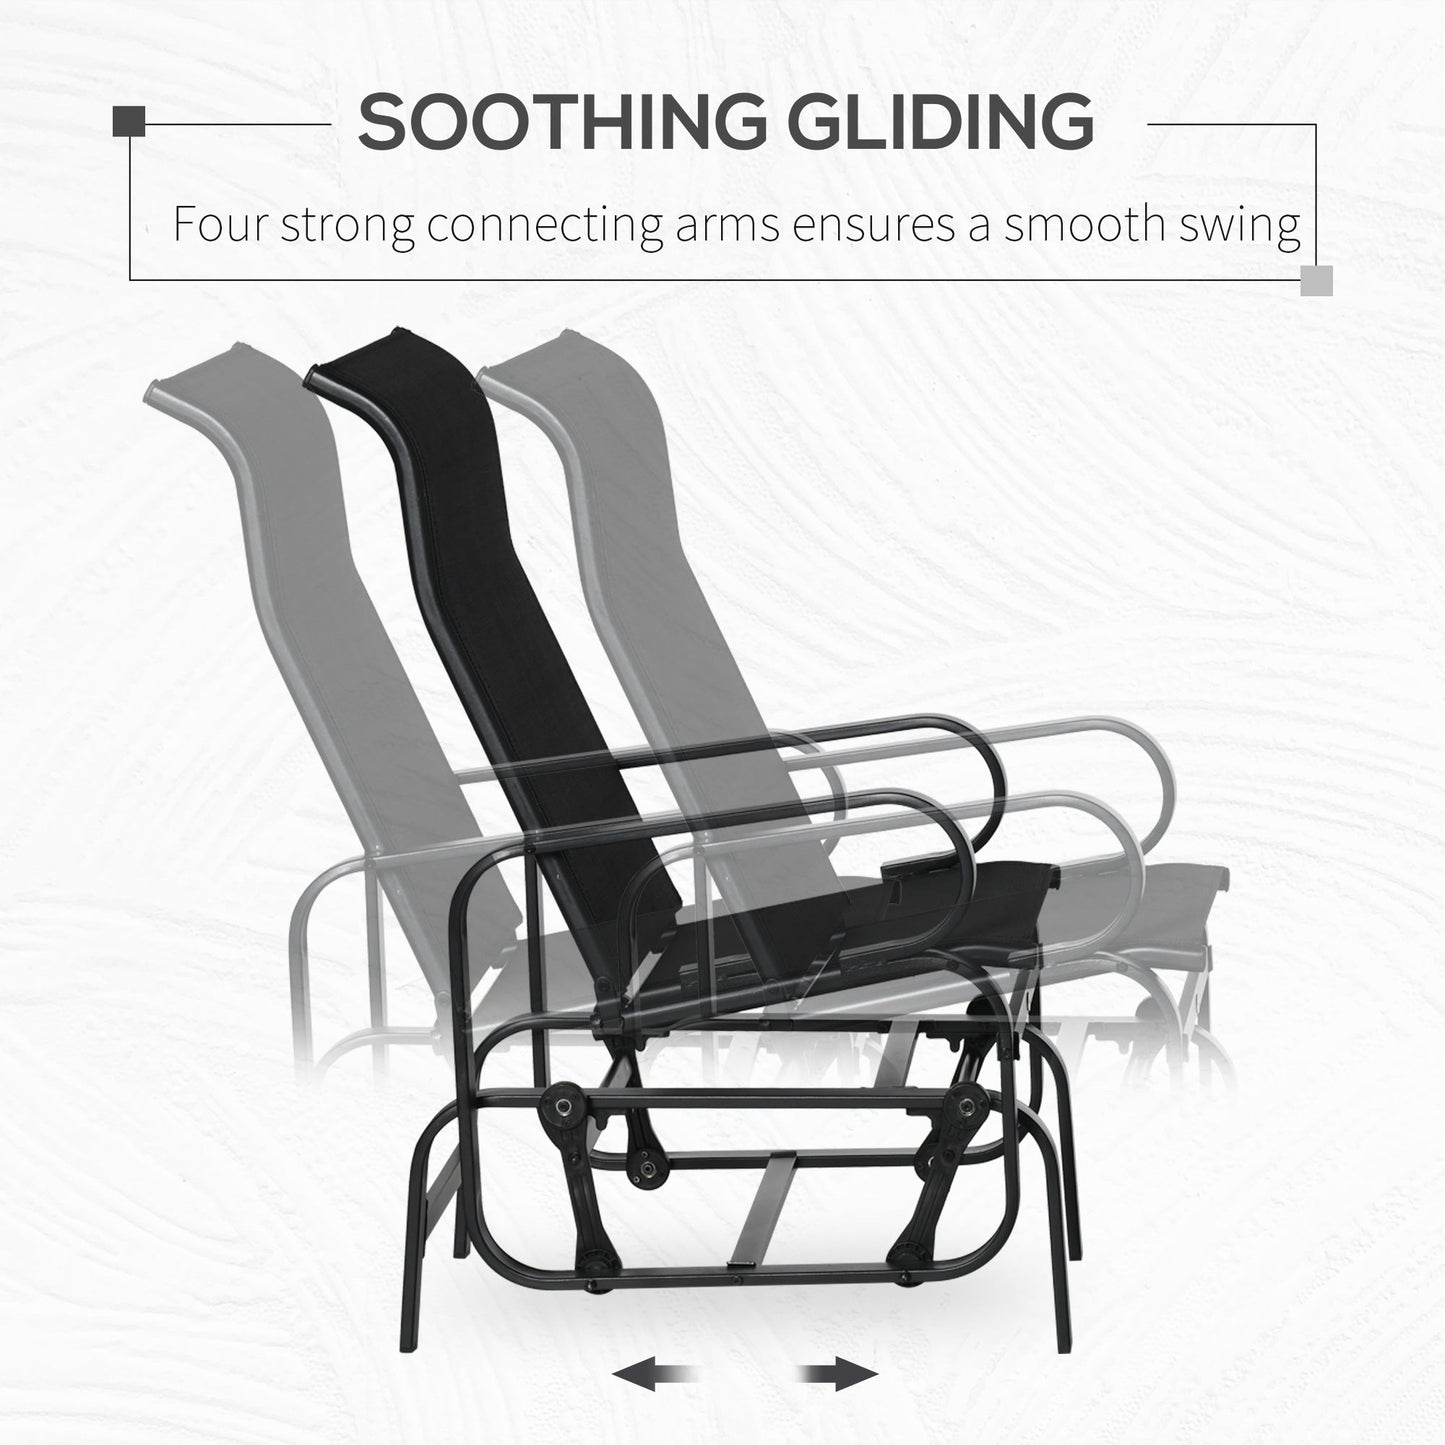 -Outsunny Glider Rocking Chair, Outdoor Glider Chair with Smooth Rocking Arms and Lightweight Construction for Patio Backyard, Black - Outdoor Style Company